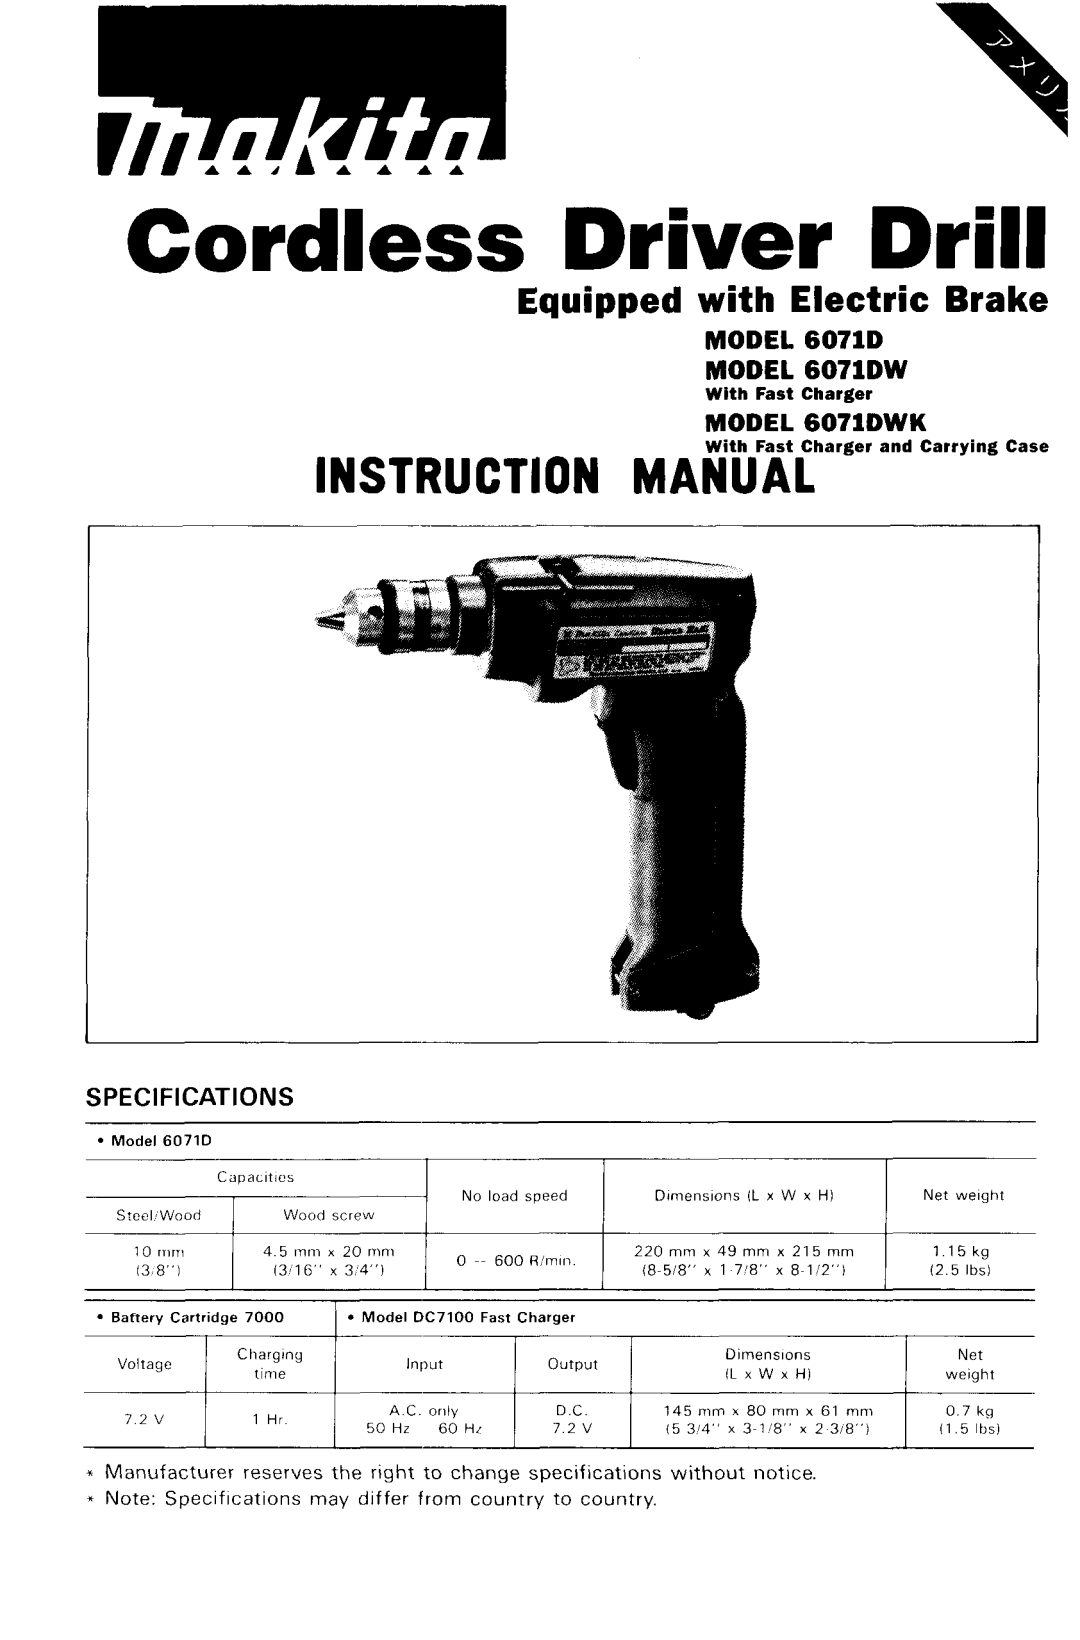 Makita 607LDWK dimensions Instruction Manual, Equipped with Electric Brake, Cordless Driver Drill, With Fast Charger, 3~18 